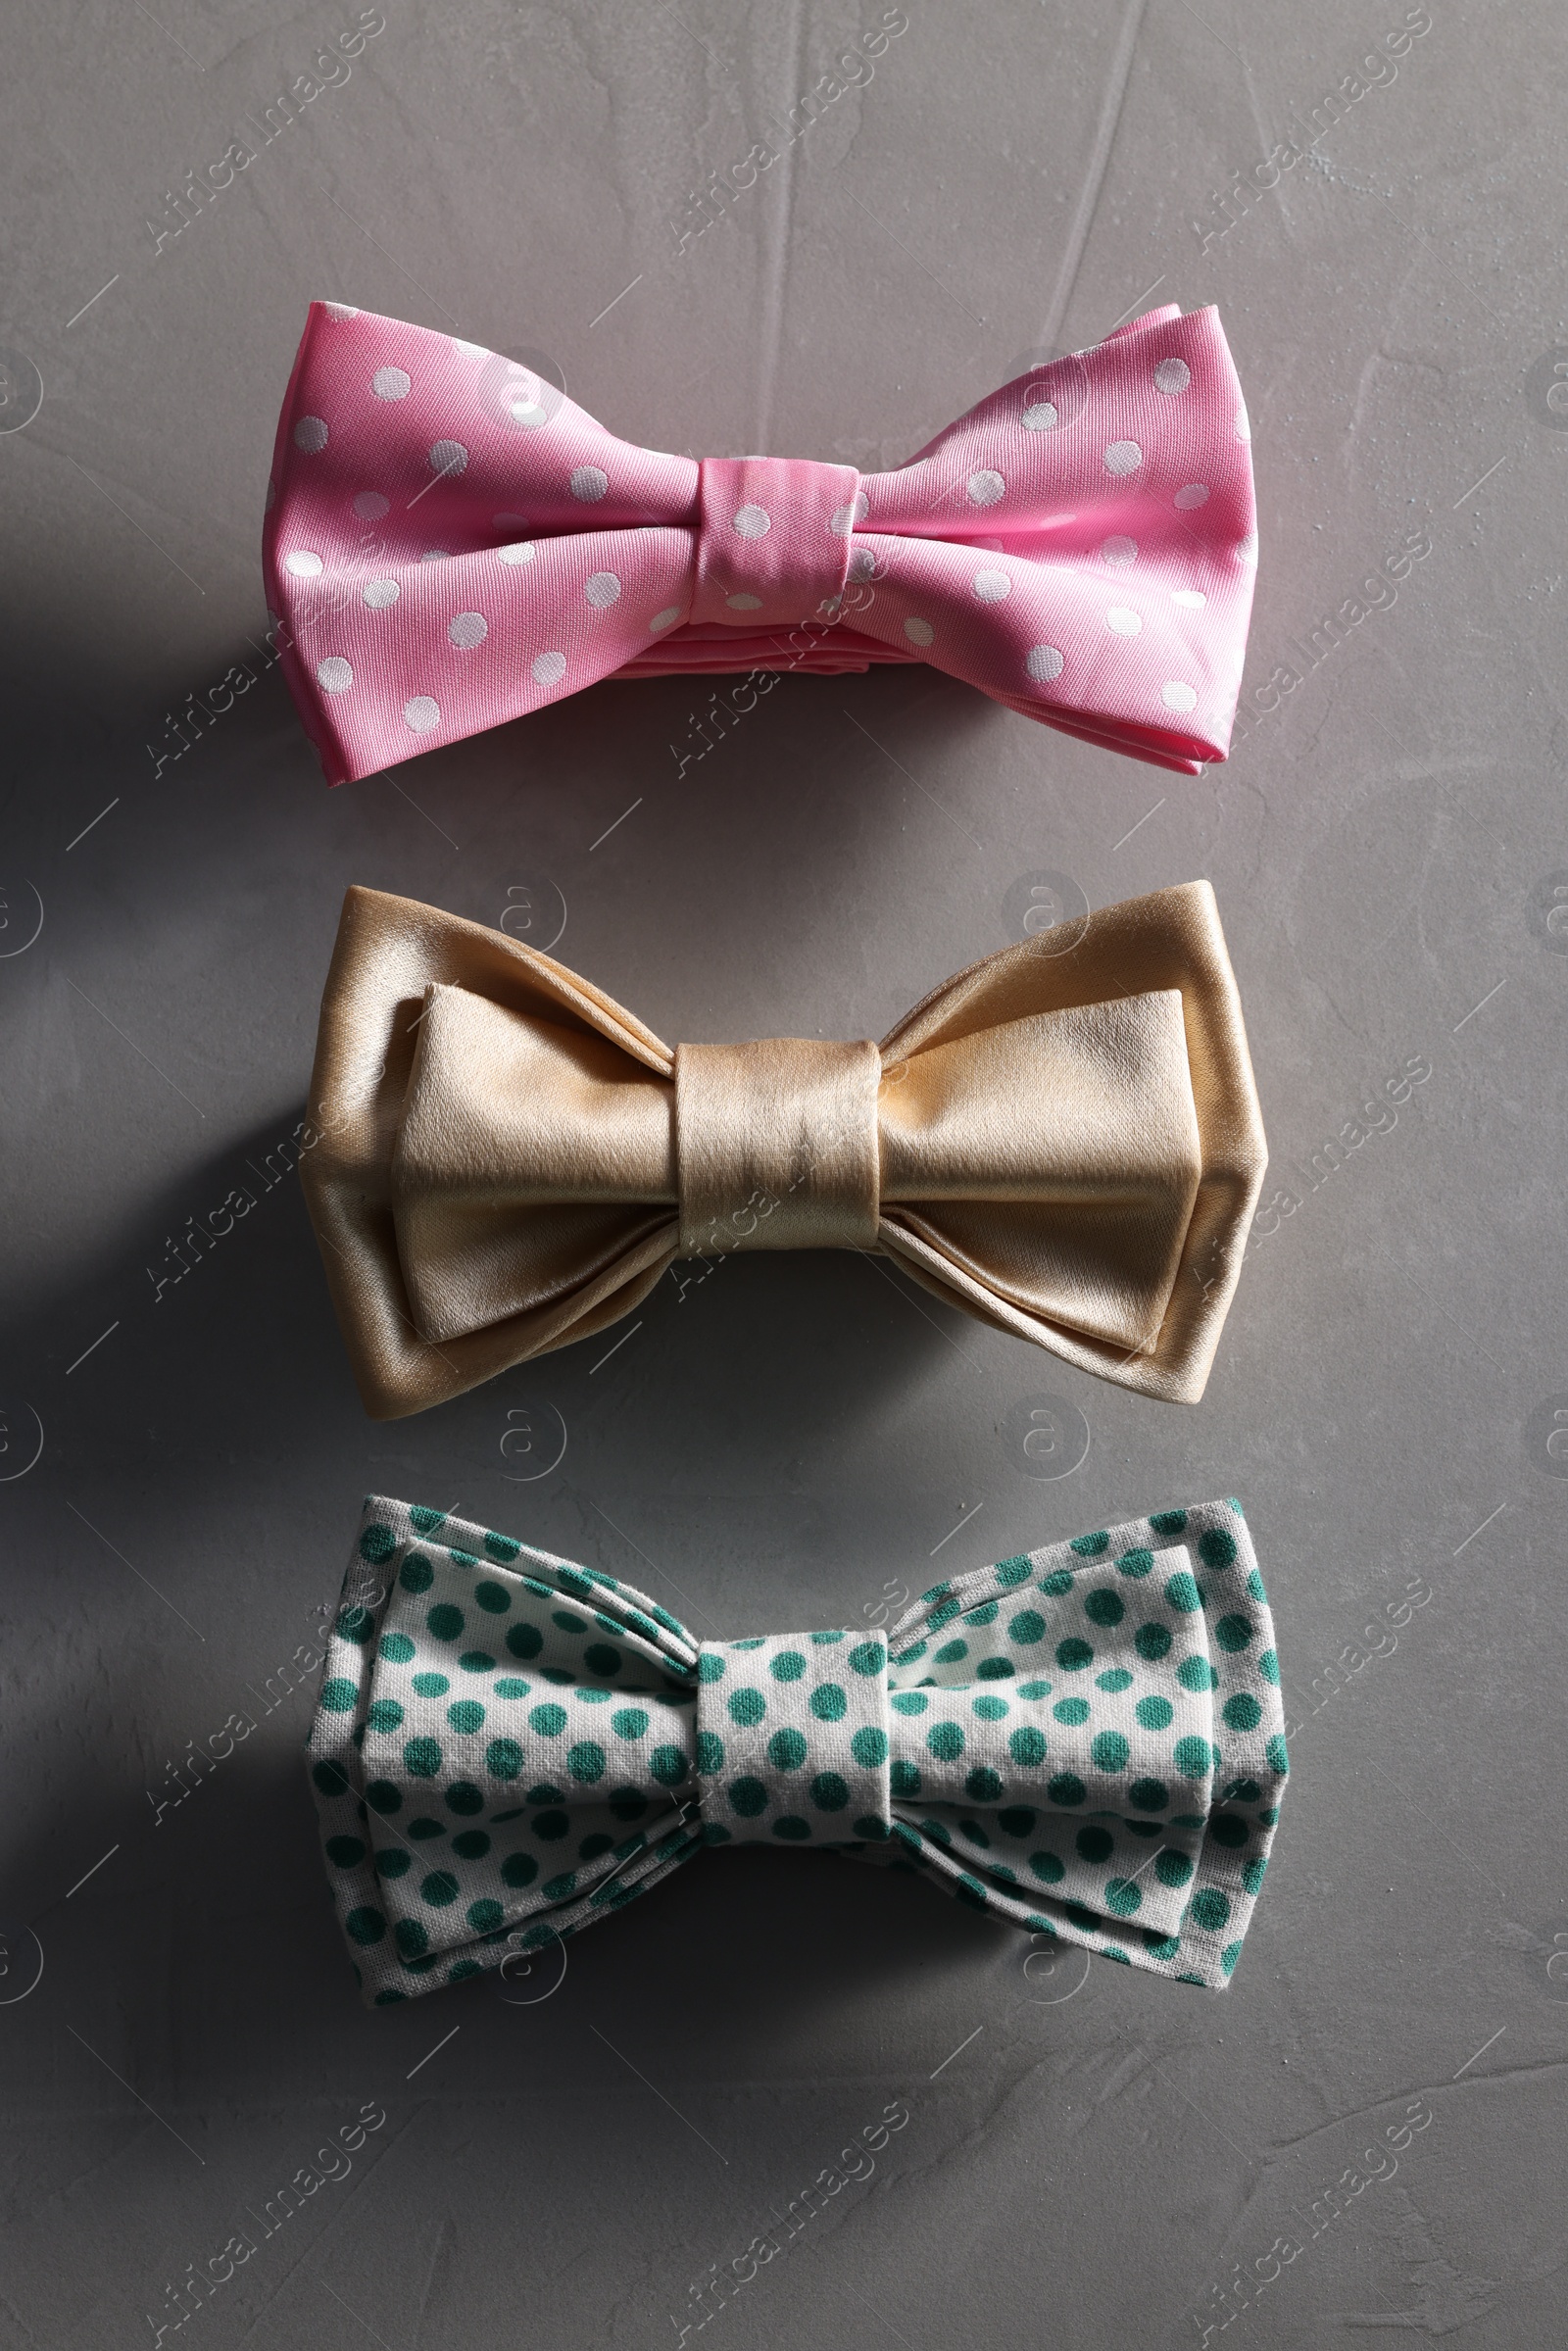 Photo of Stylish color bow ties on gray textured background, flat lay